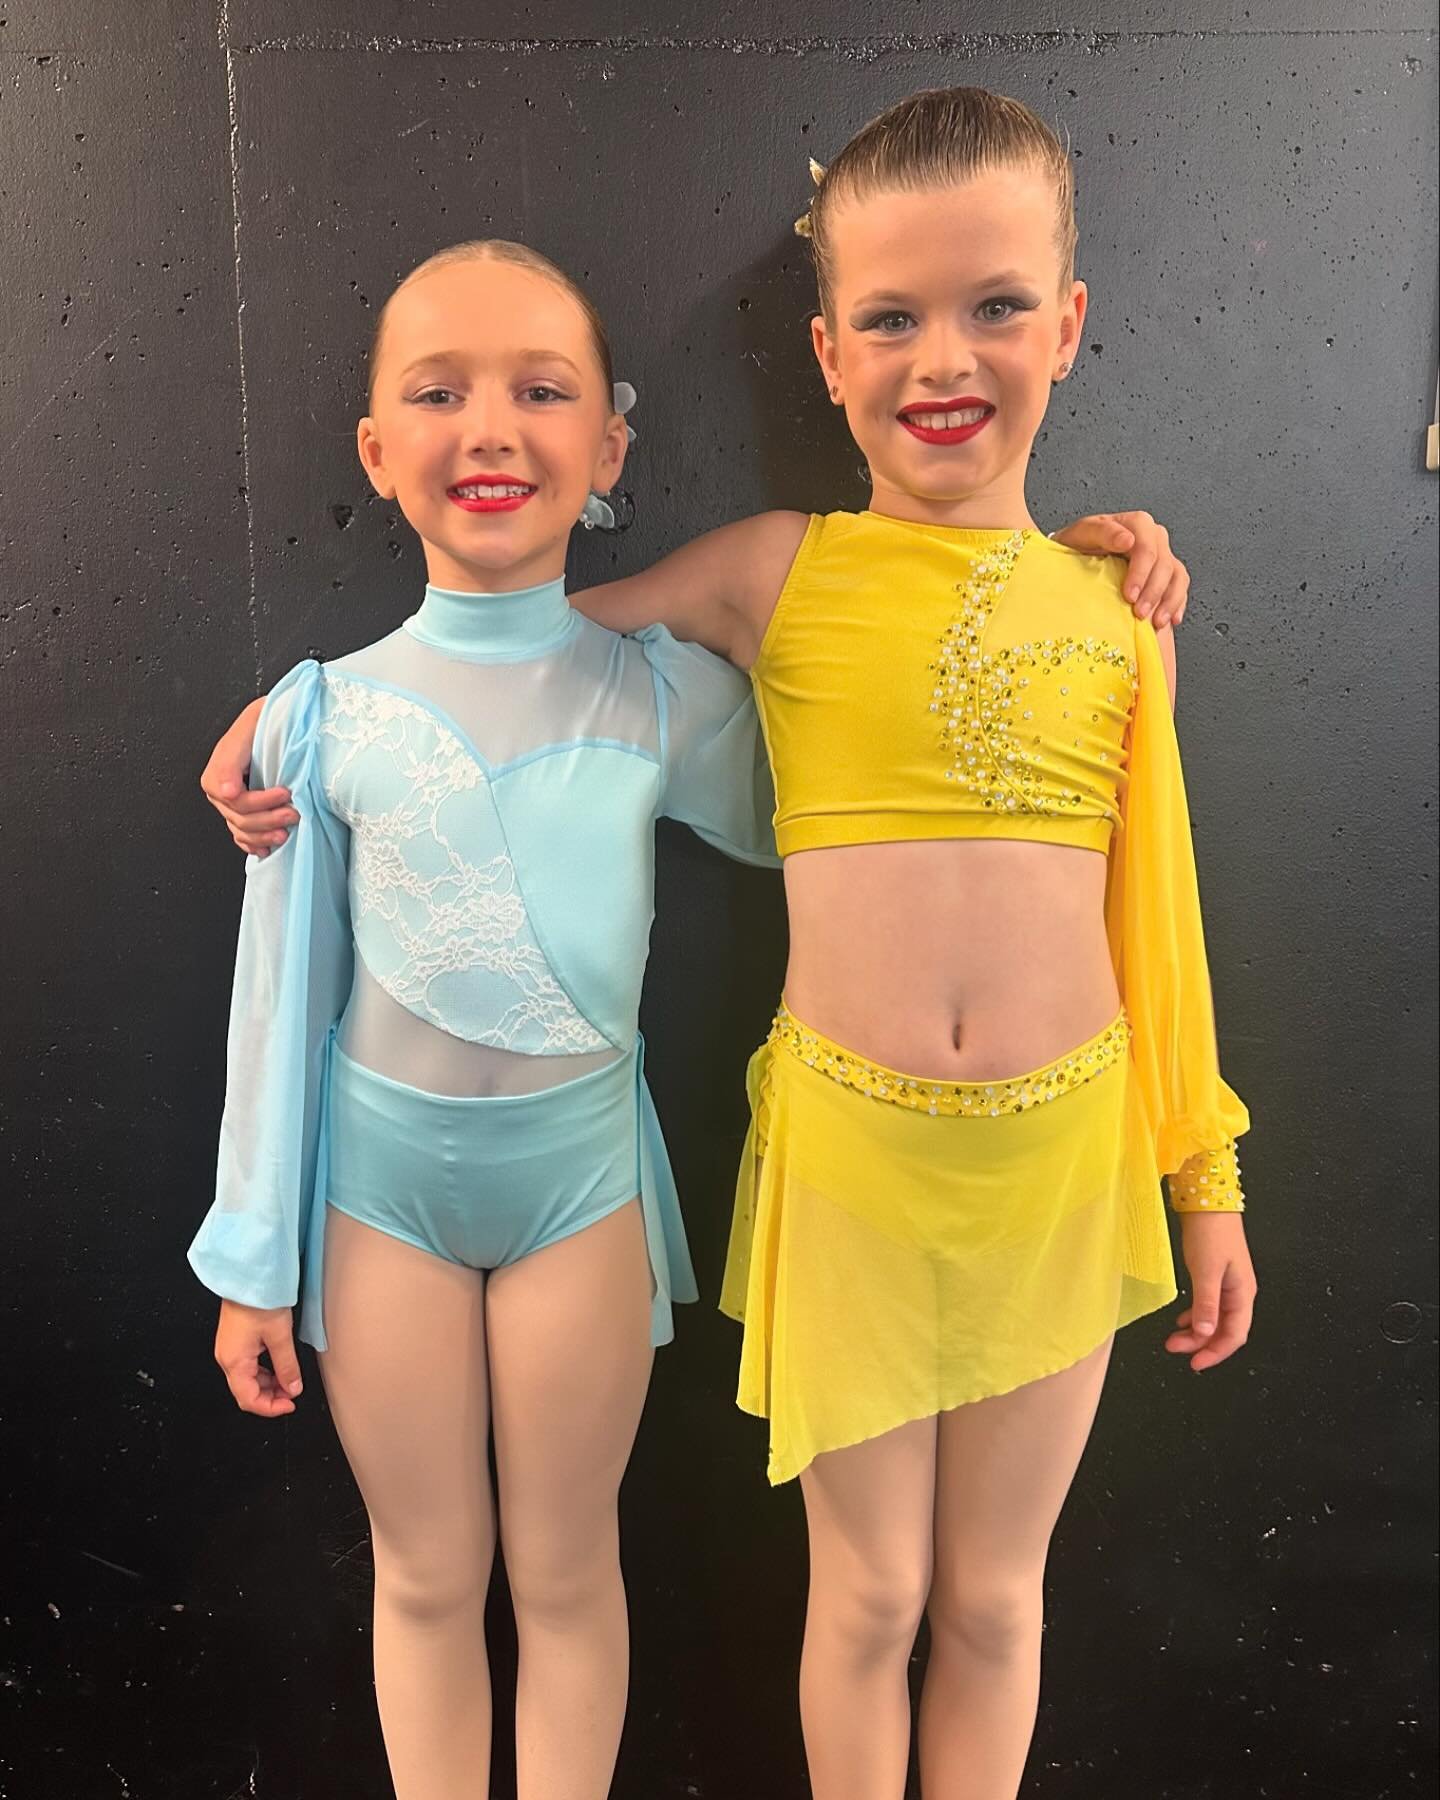 What a start to our annual Taree Eisteddfod! Our novice soloists walked away with some amazing performances, memories and places over the last couple of days! 
We are so proud of you shining up there on that stage 🩷

Olivia.K
🥇 Lyrical 

Evie:
🥇 J